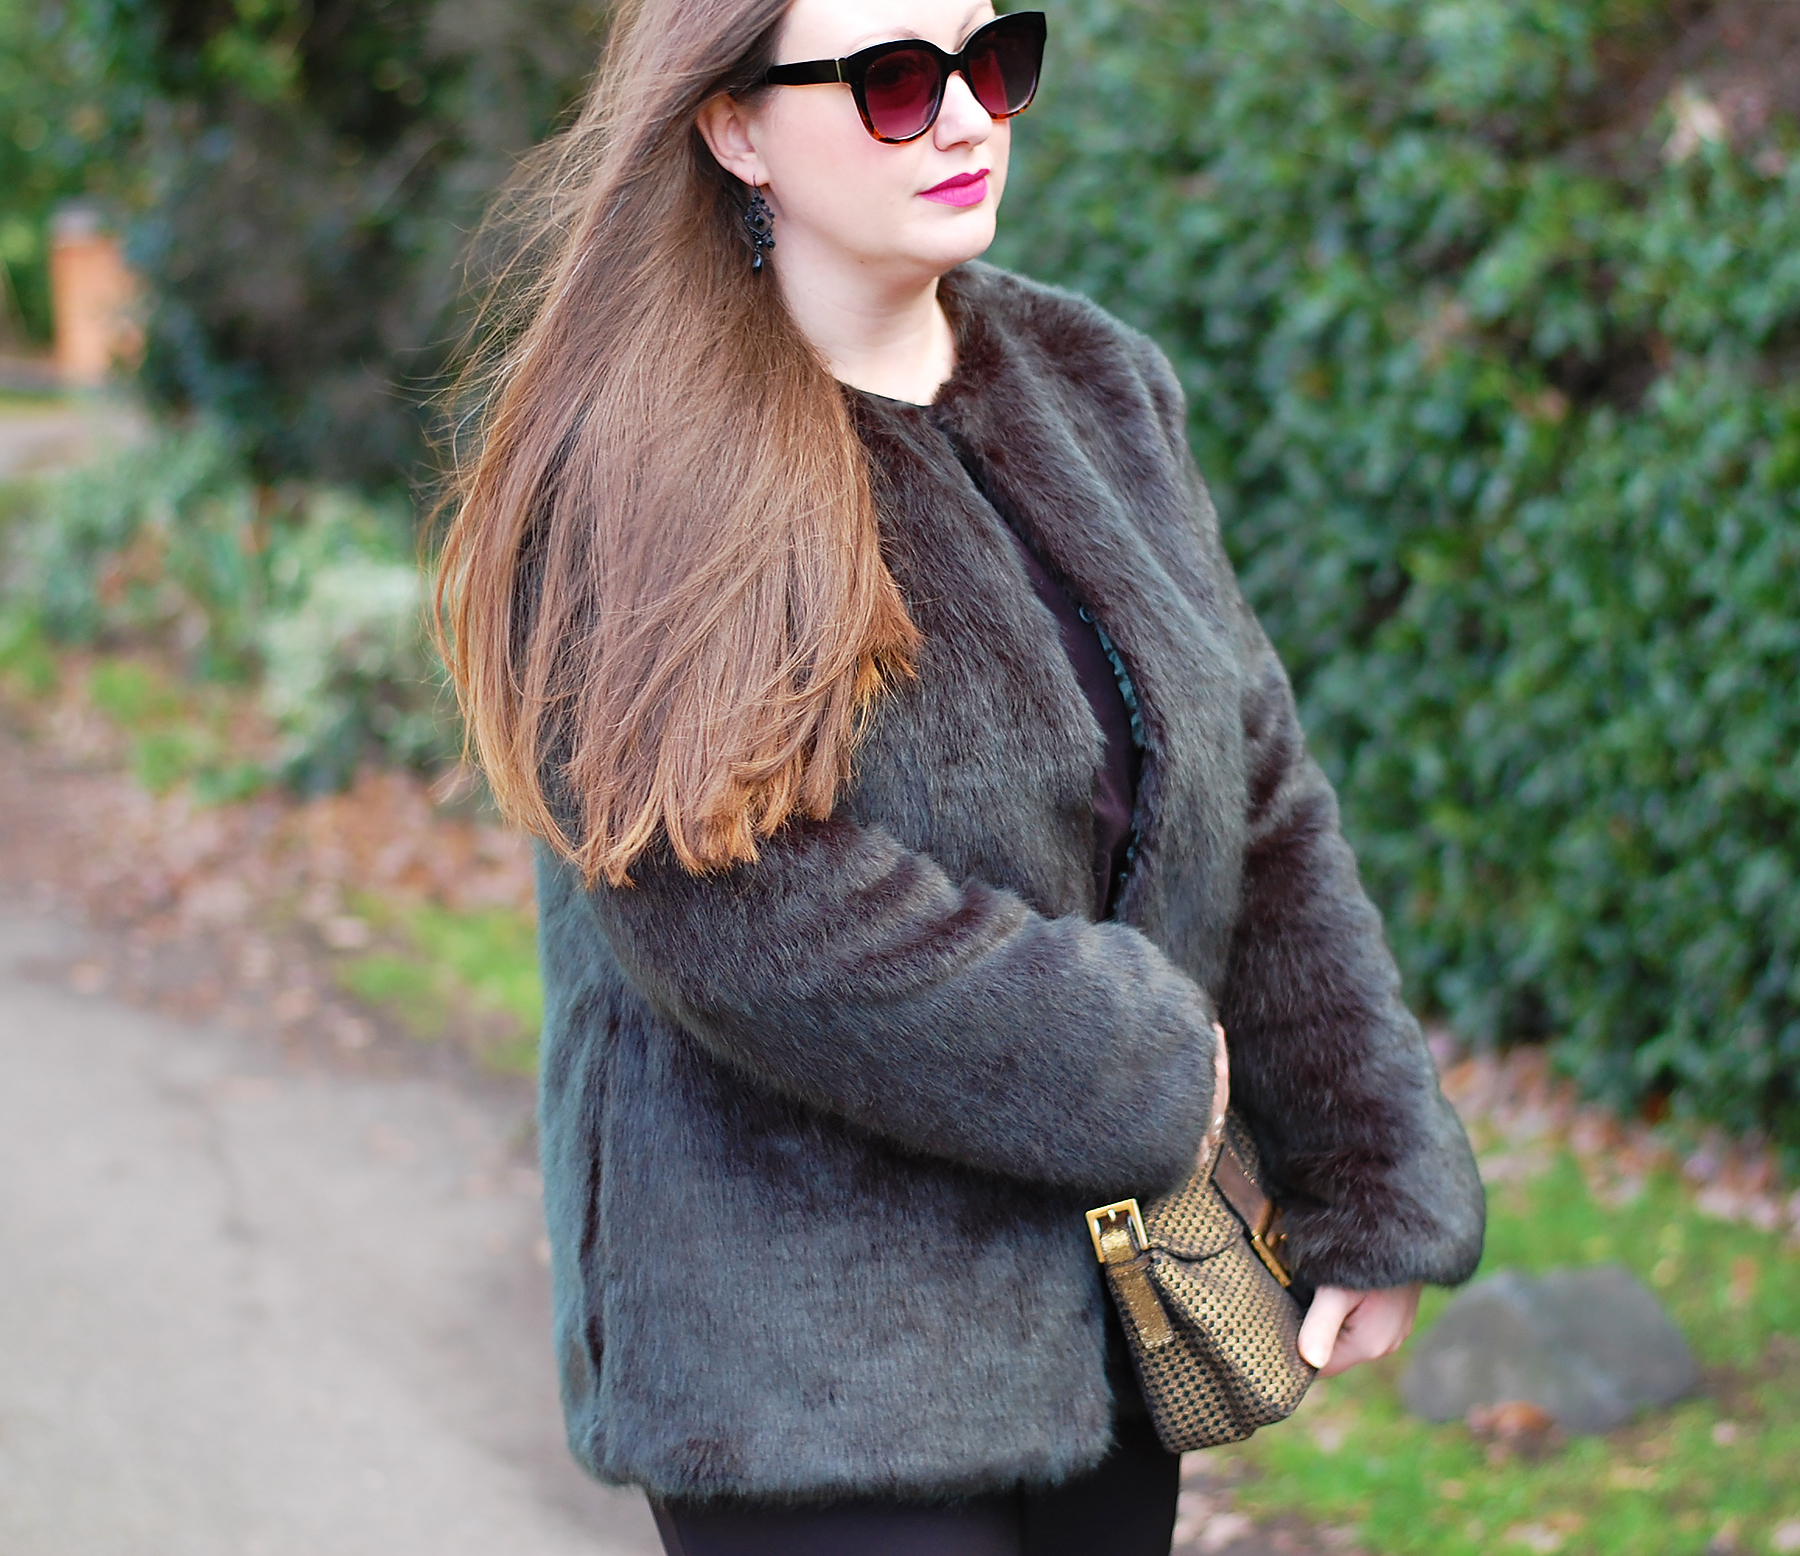 Forest green coat outfit